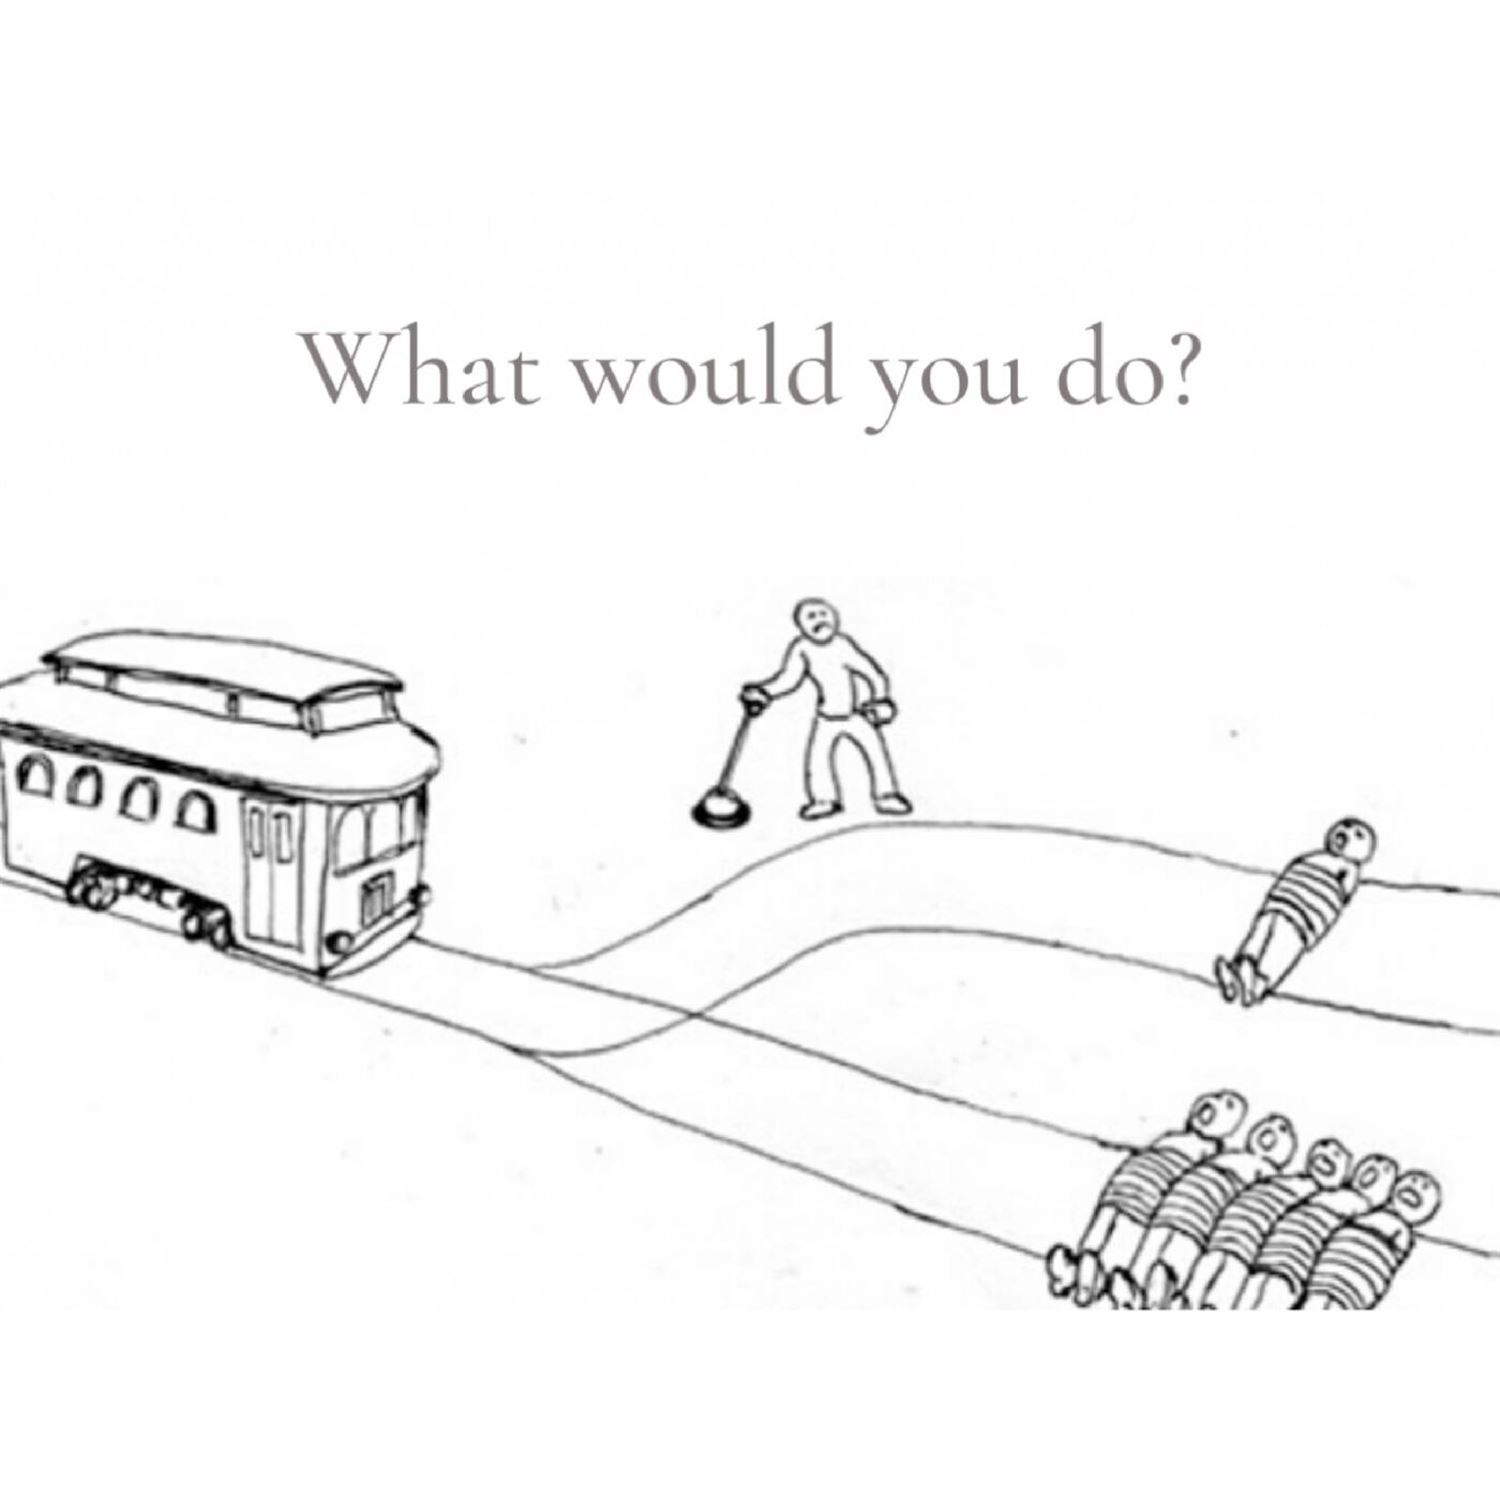 Unambiguous good and the trolley problem